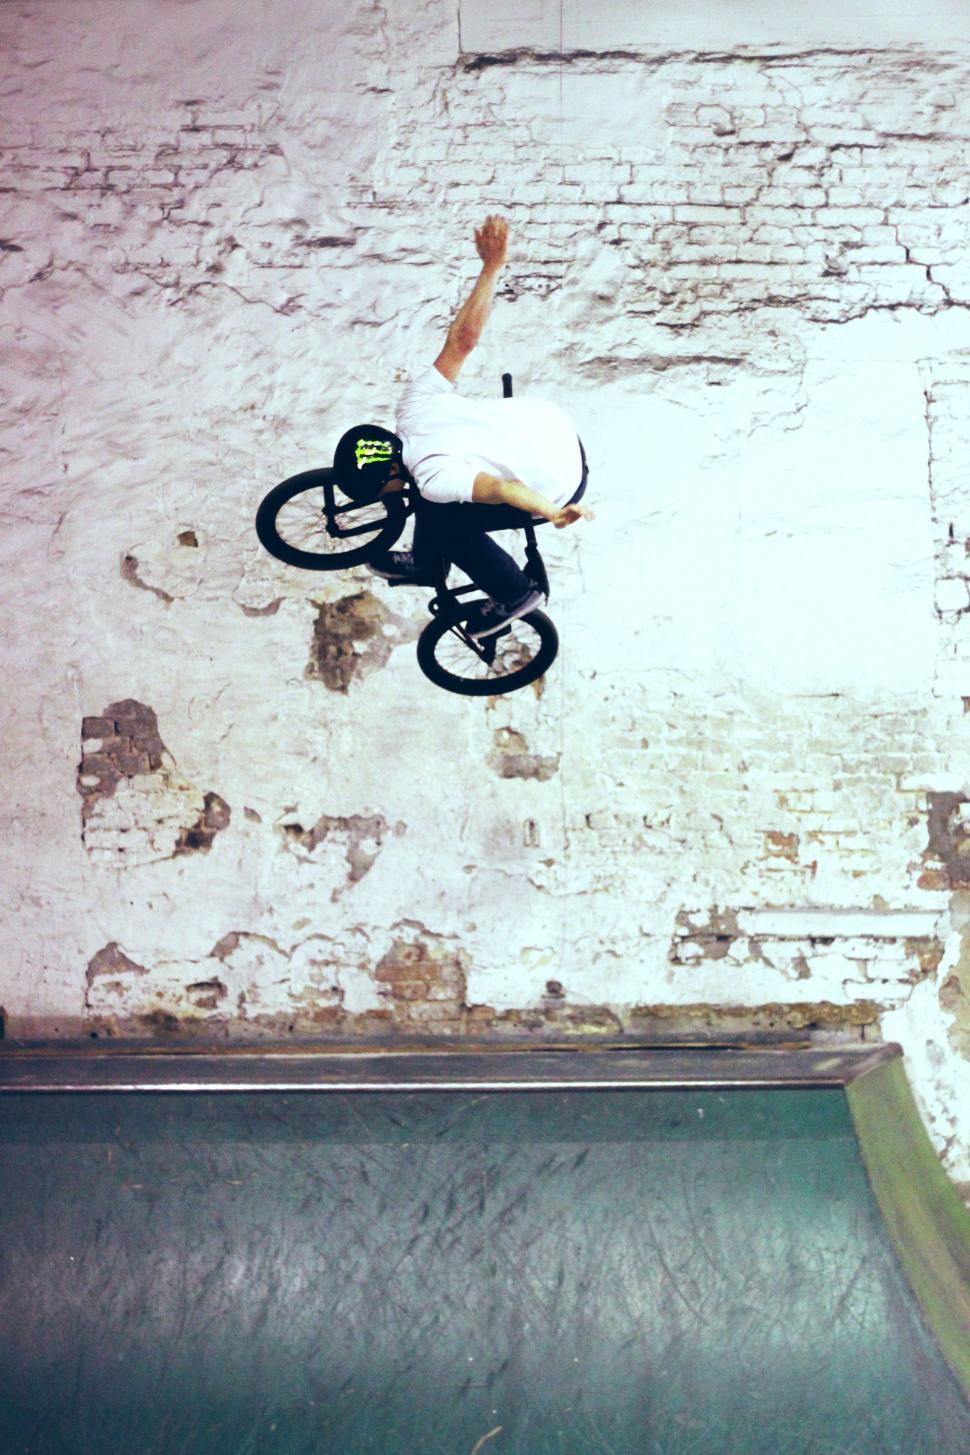 Free Image of Person Riding a Bike Down a Ramp 